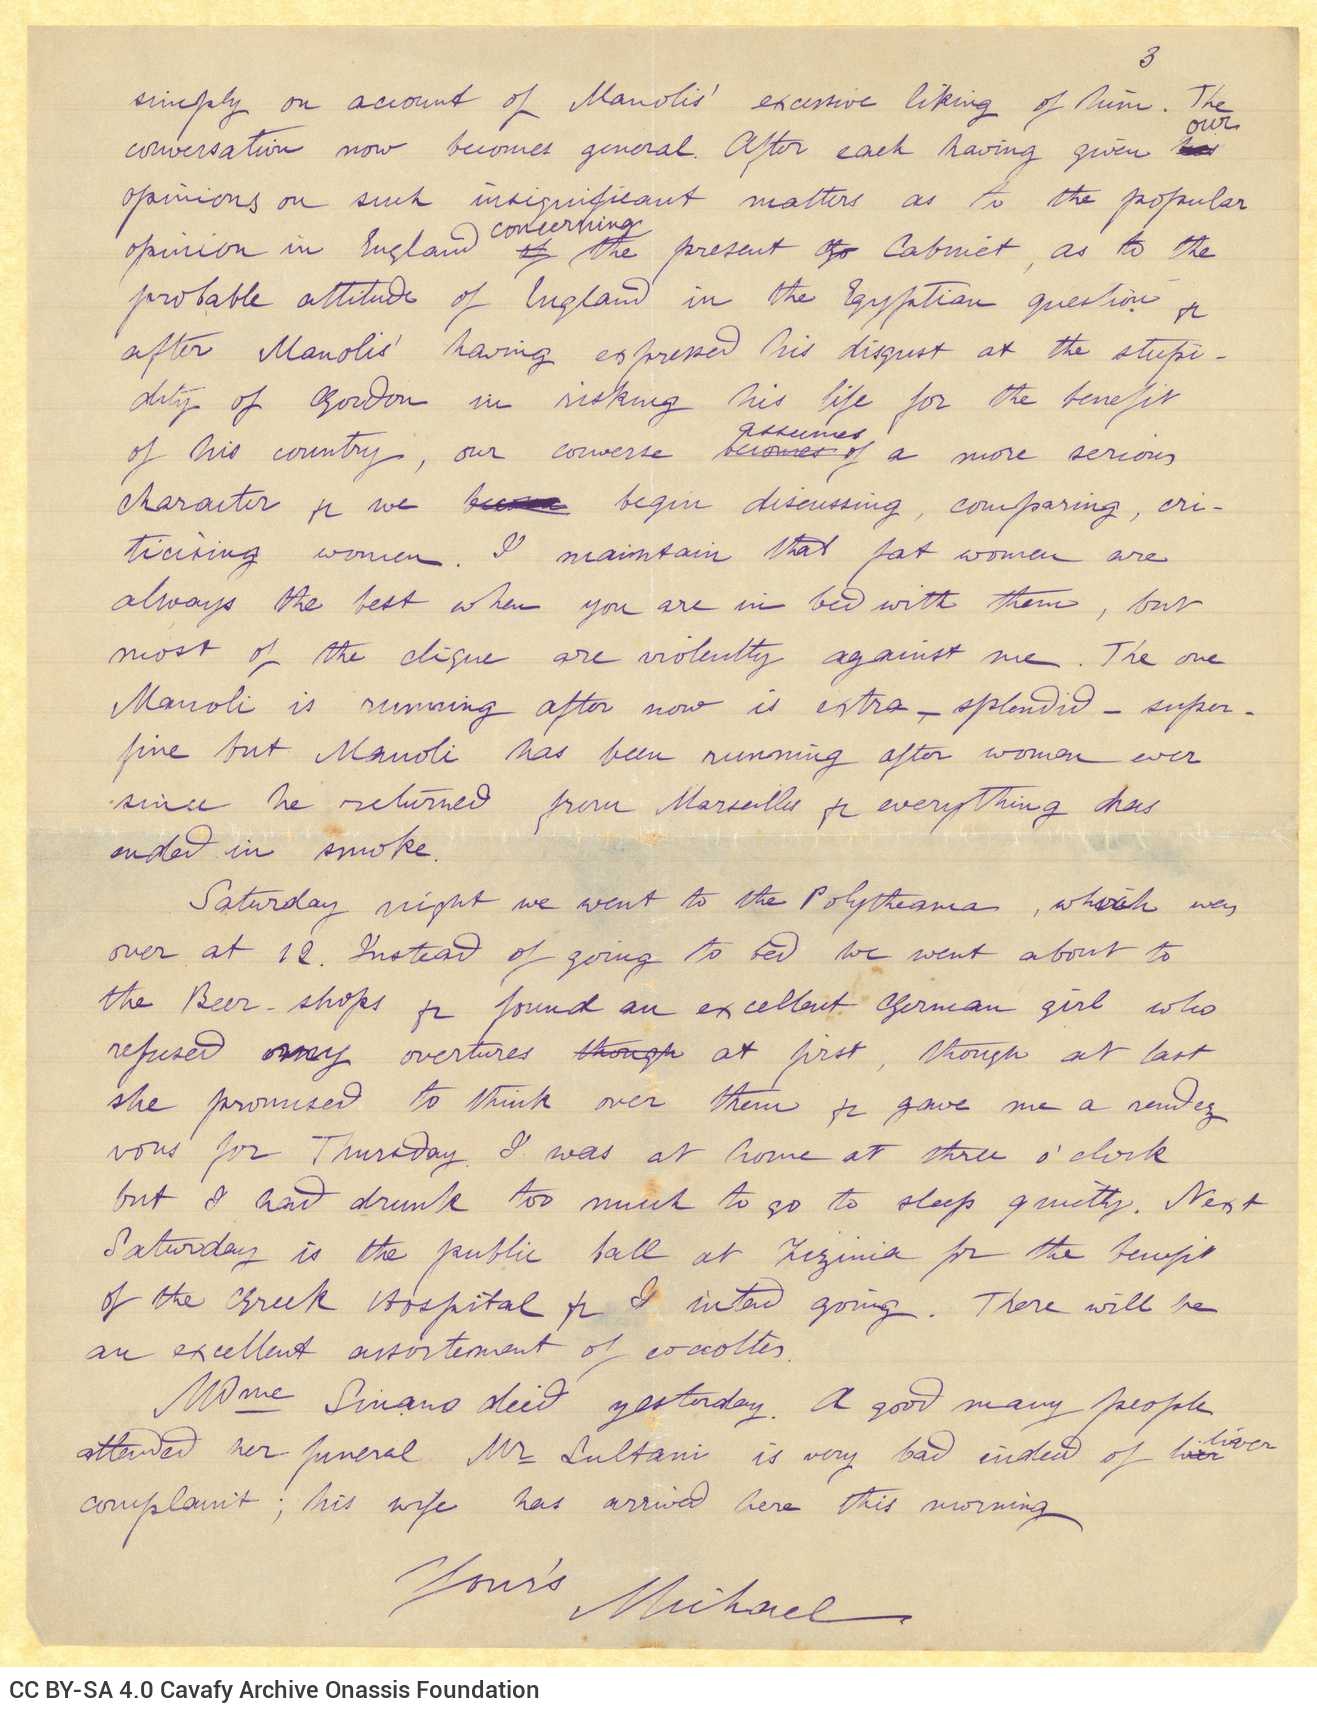 Handwritten letter by Mike Ralli to Cavafy on the recto of three sheets. Reference to John Browning, on the occasion of remar